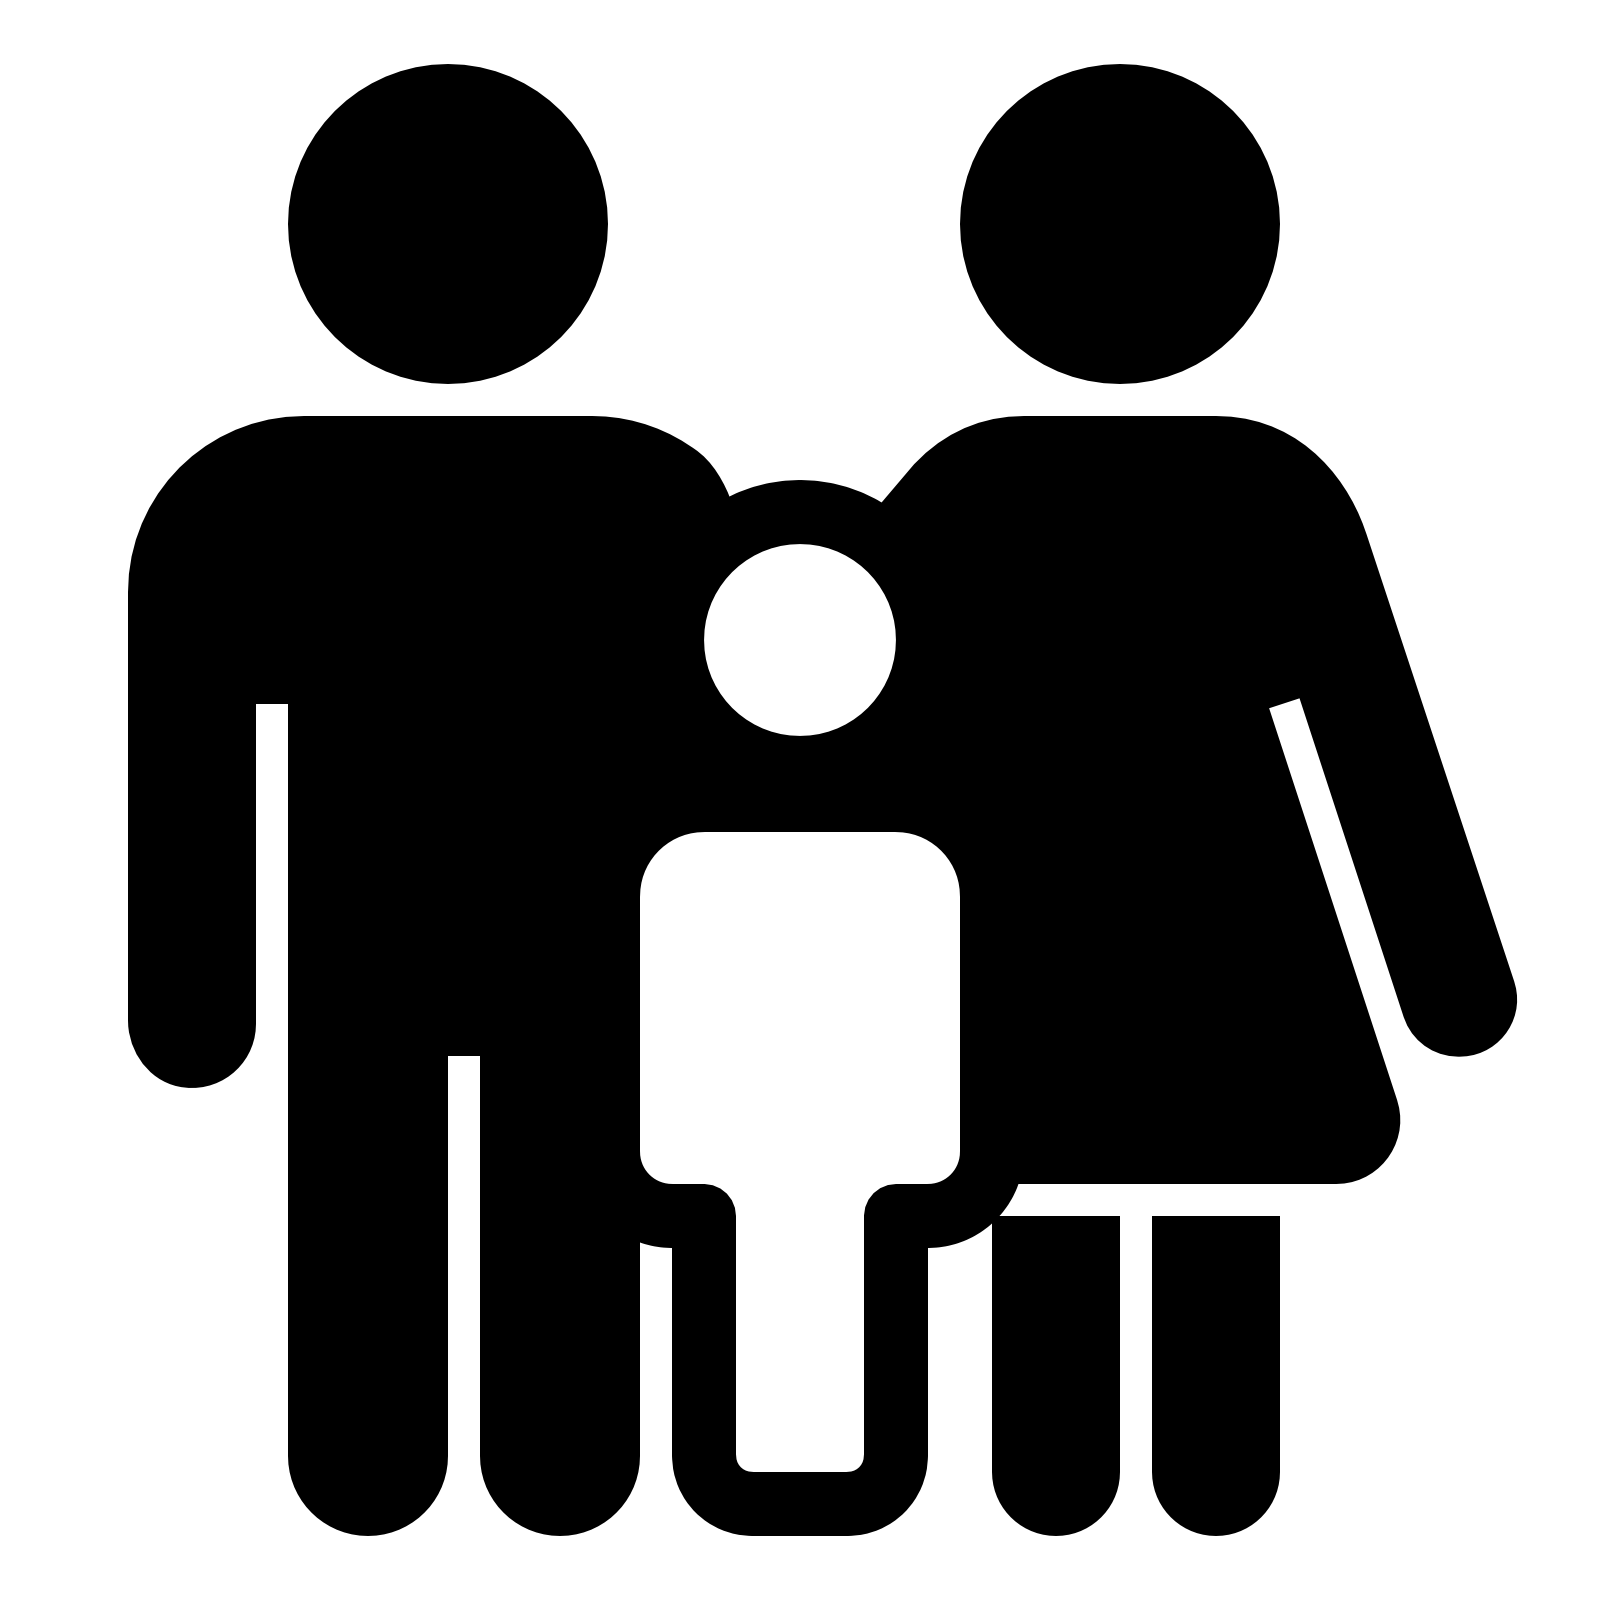 parents clipart marriage family